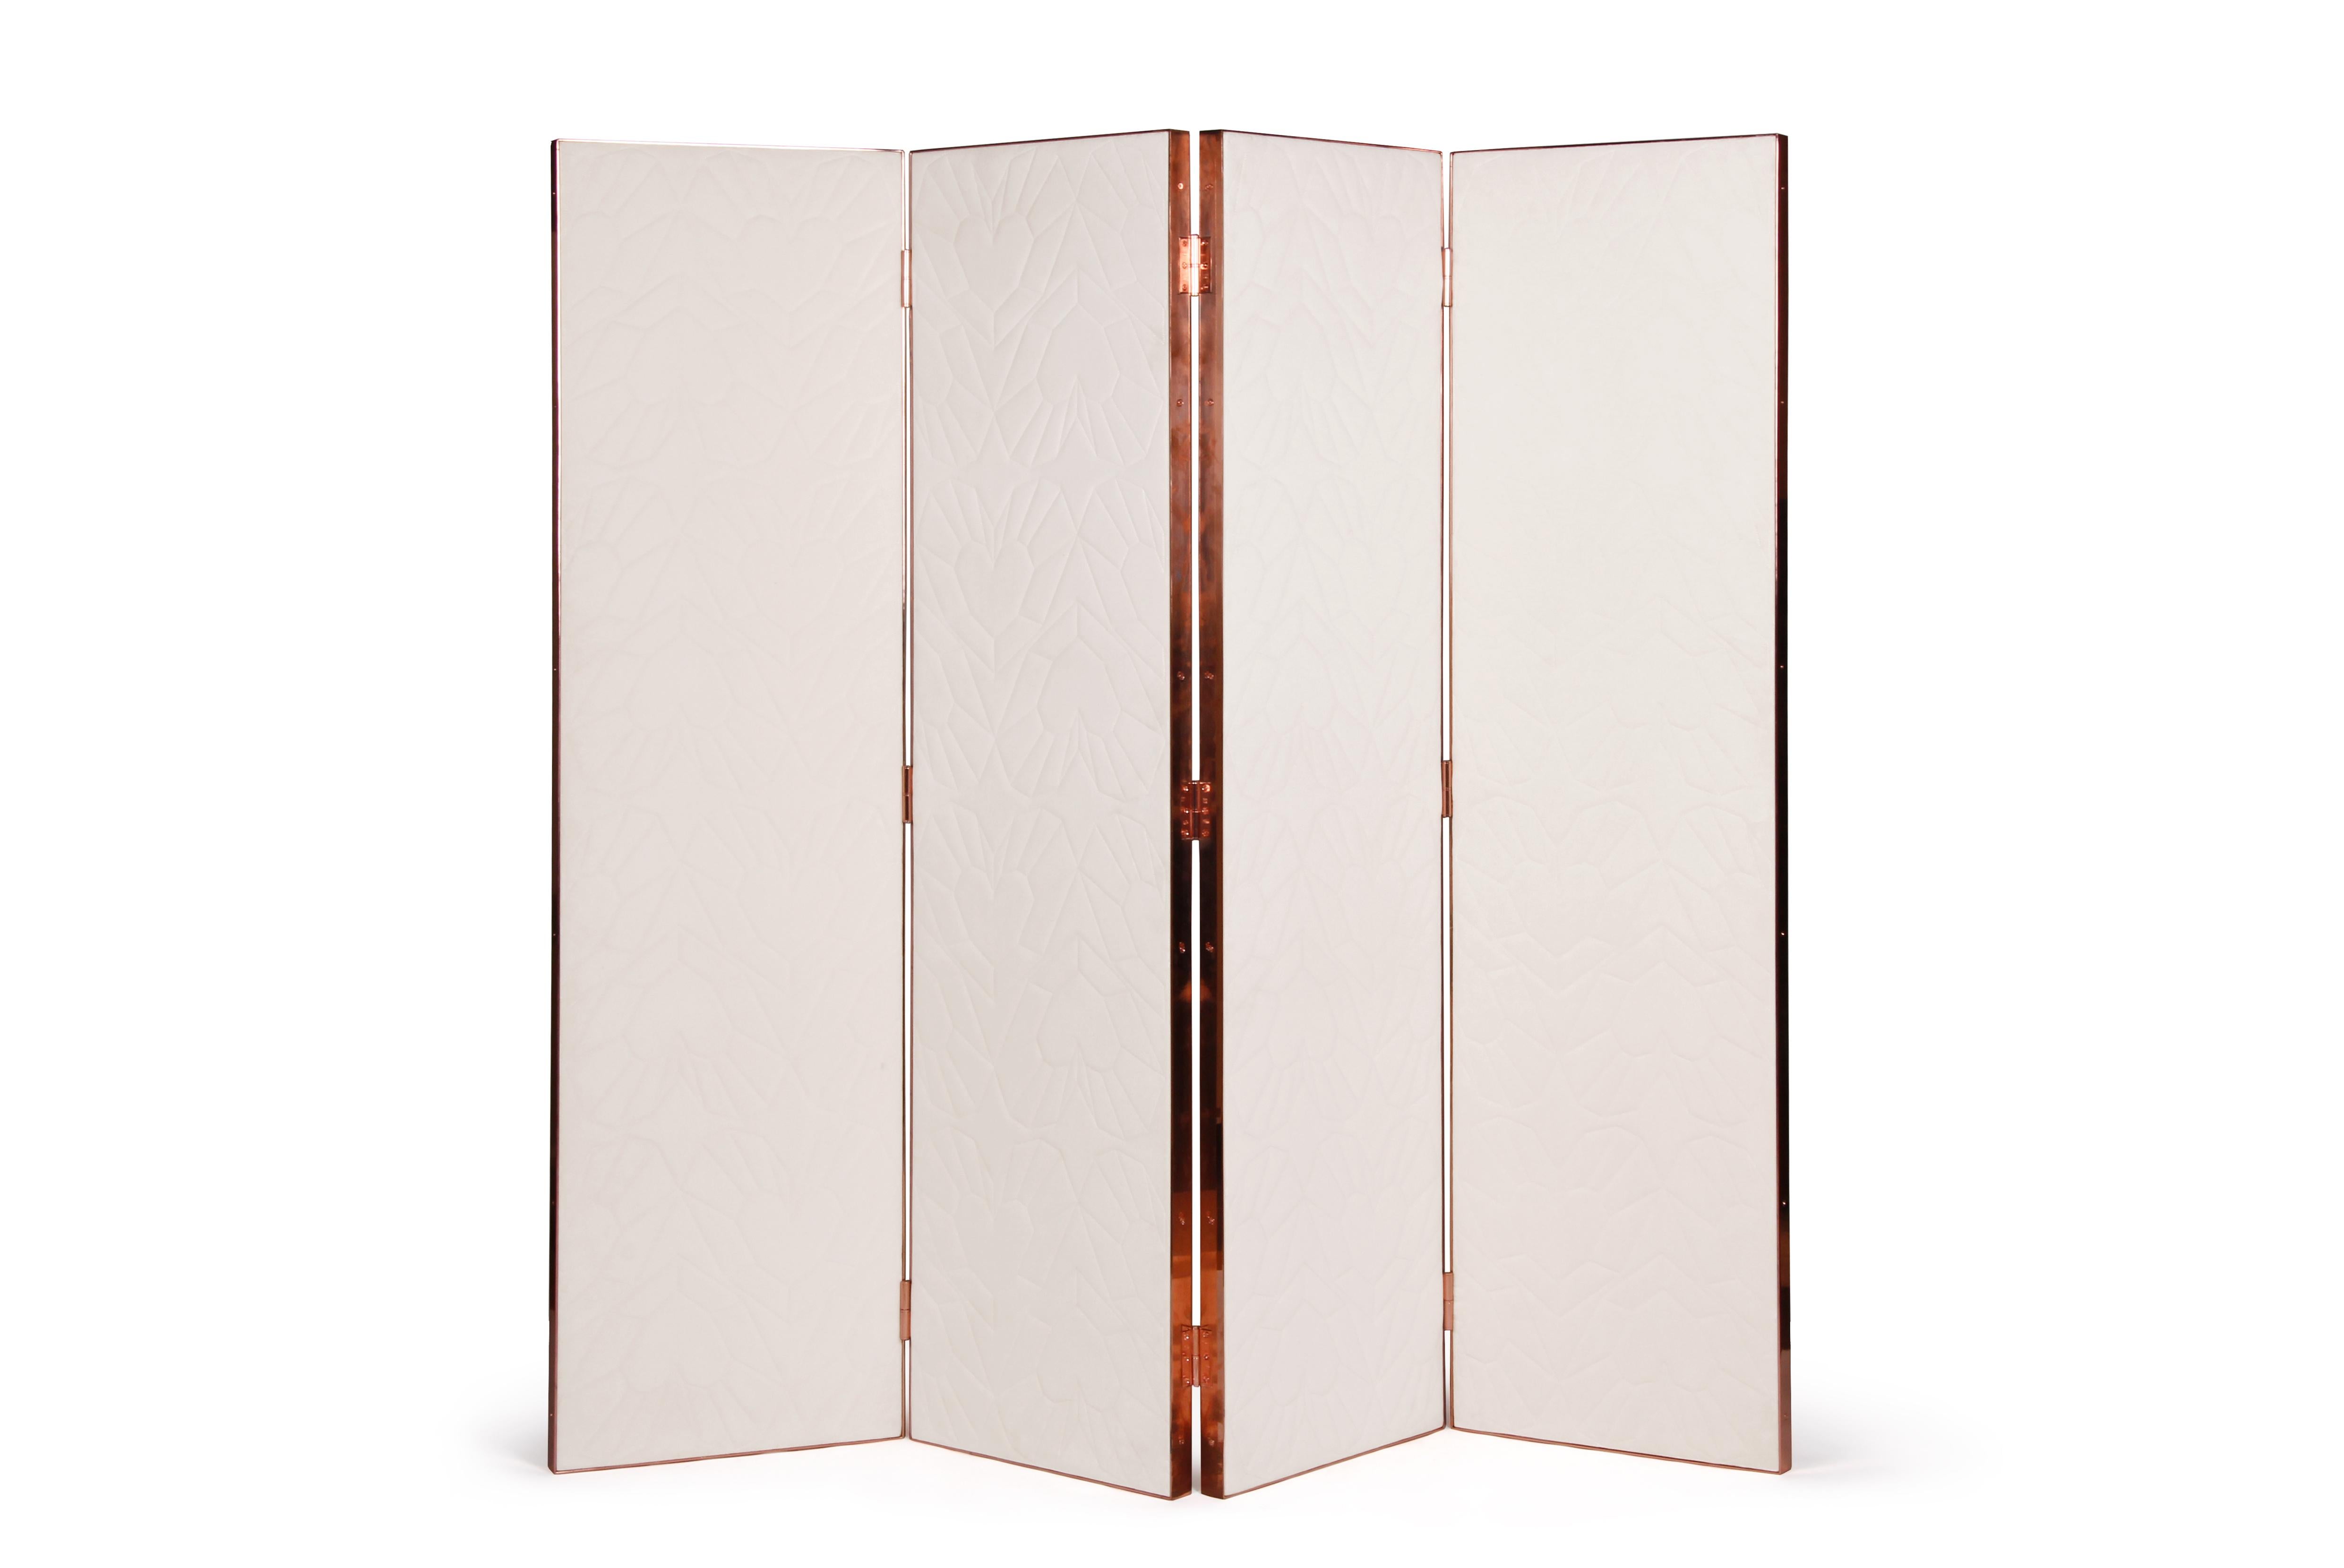 Queen heart folding screen by Royal Stranger
Dimensions: 190 x 200 x 4 cm
Materials: Pearl royal velvet upholstery framed with stainless steel coated in copper.

The Queen heart folding screen projects you to a princess wonderland bedroom,